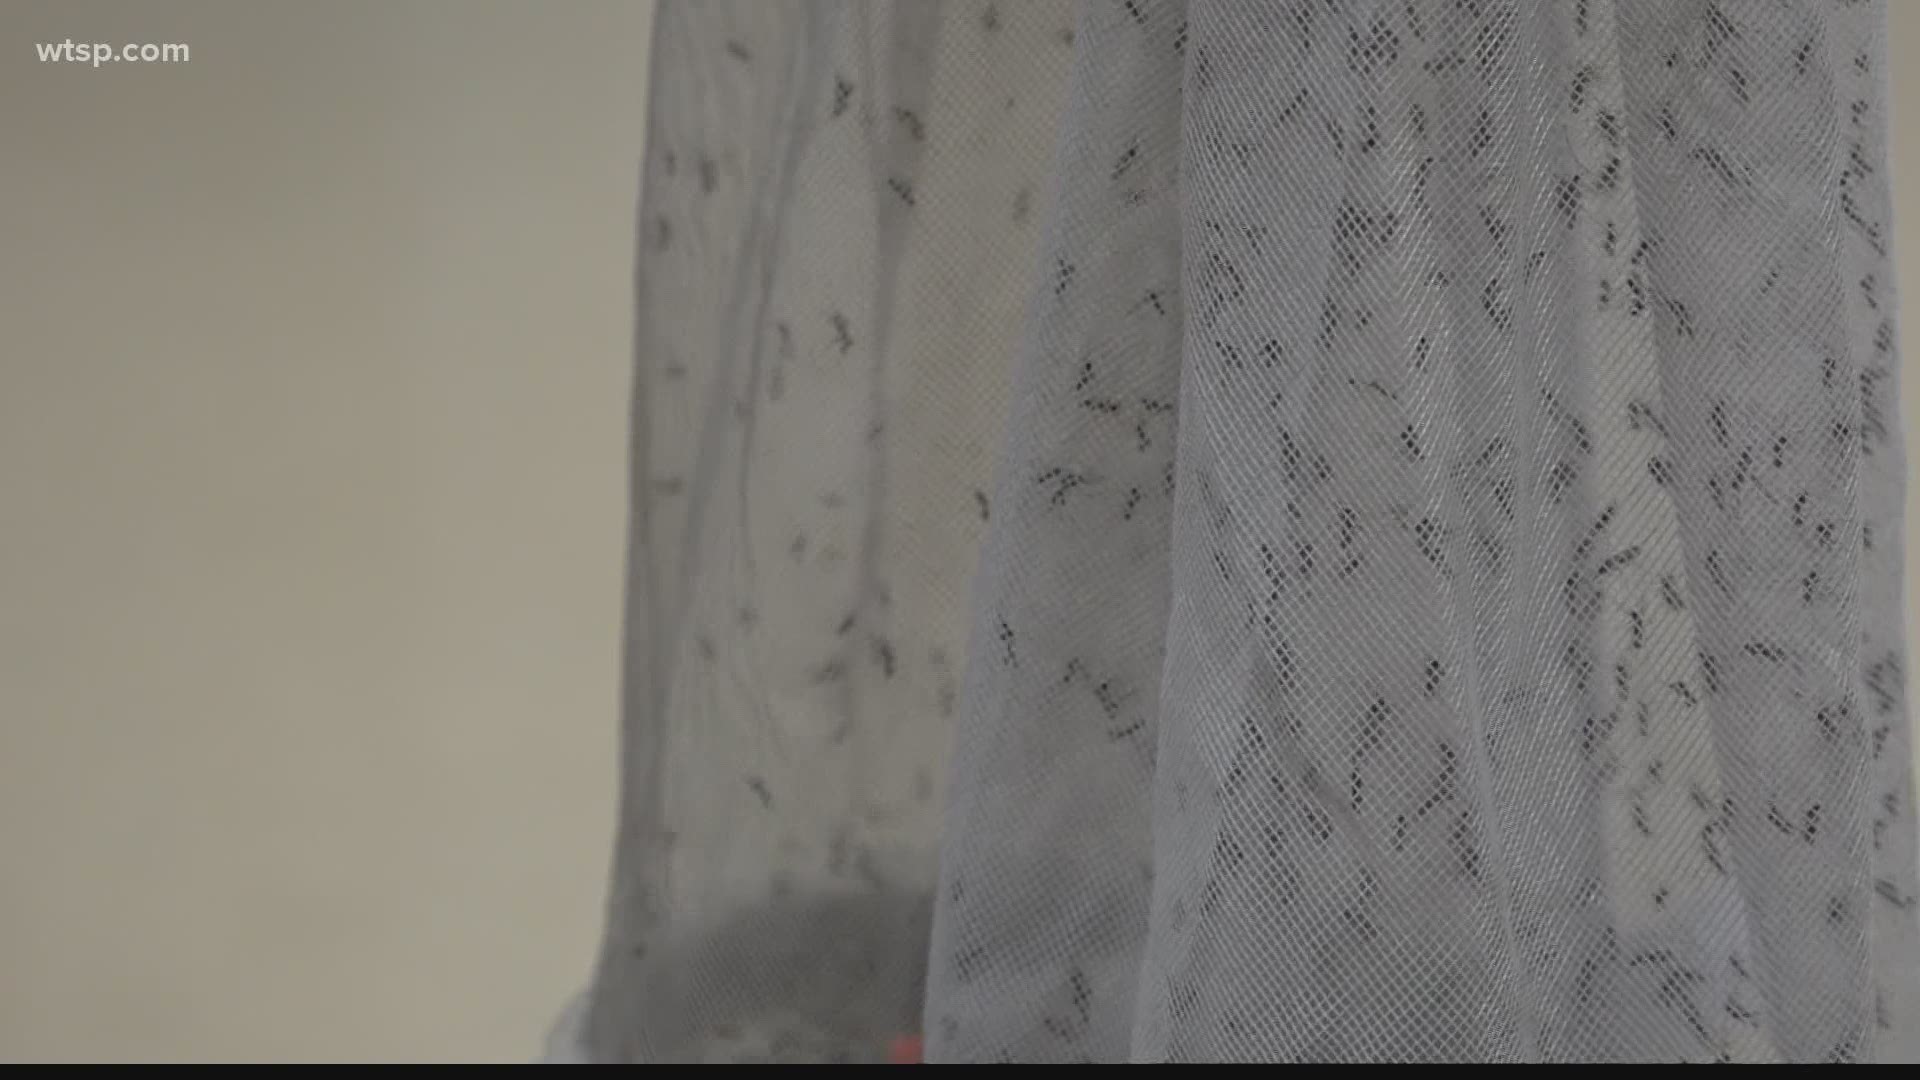 Tampa Bay has no shortage of mosquitoes and Hillsborough County is making sure they don't carry more diseases during this pandemic.